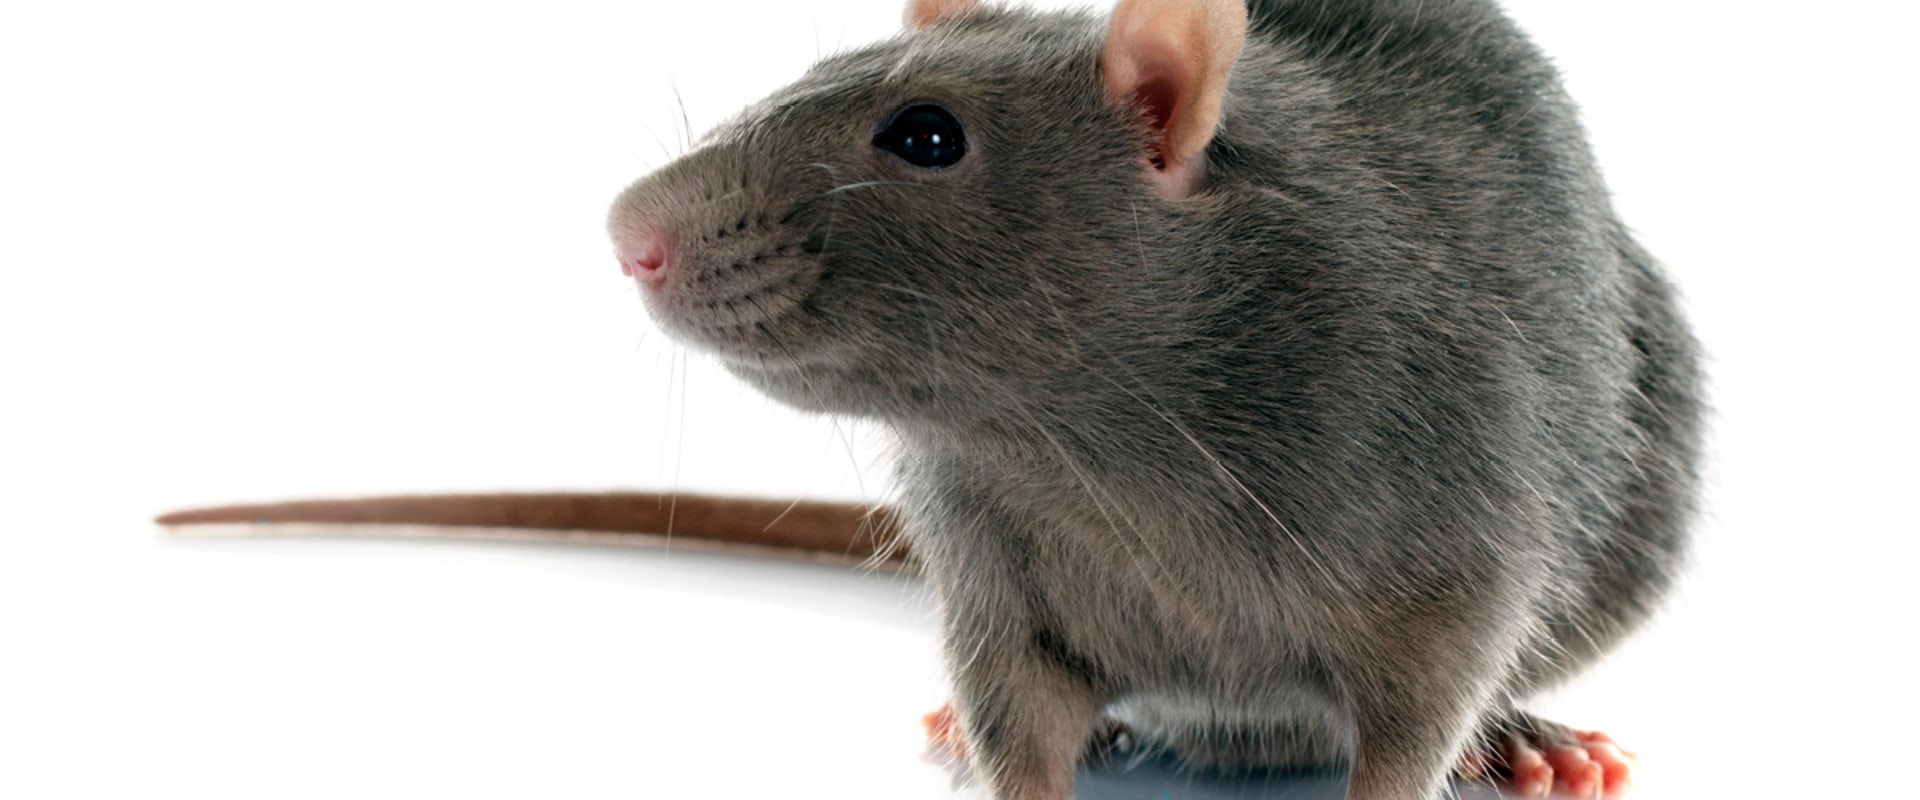 What is the most effective rodent control?